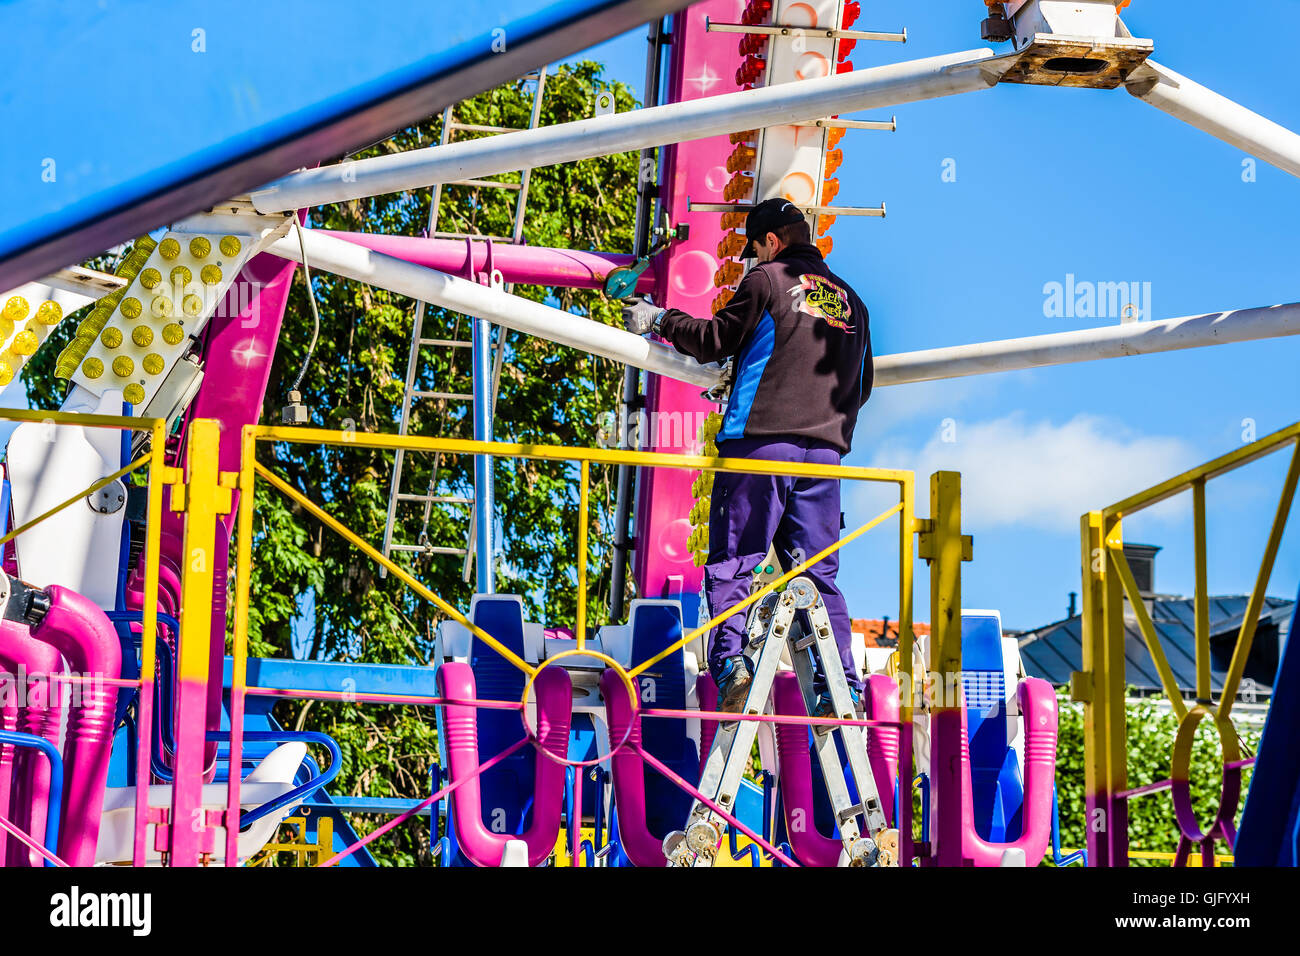 Kalmar, Sweden - August 10, 2016: Male worker on ladder assembling a public amusement ride or carnival ride for an upcoming publ Stock Photo